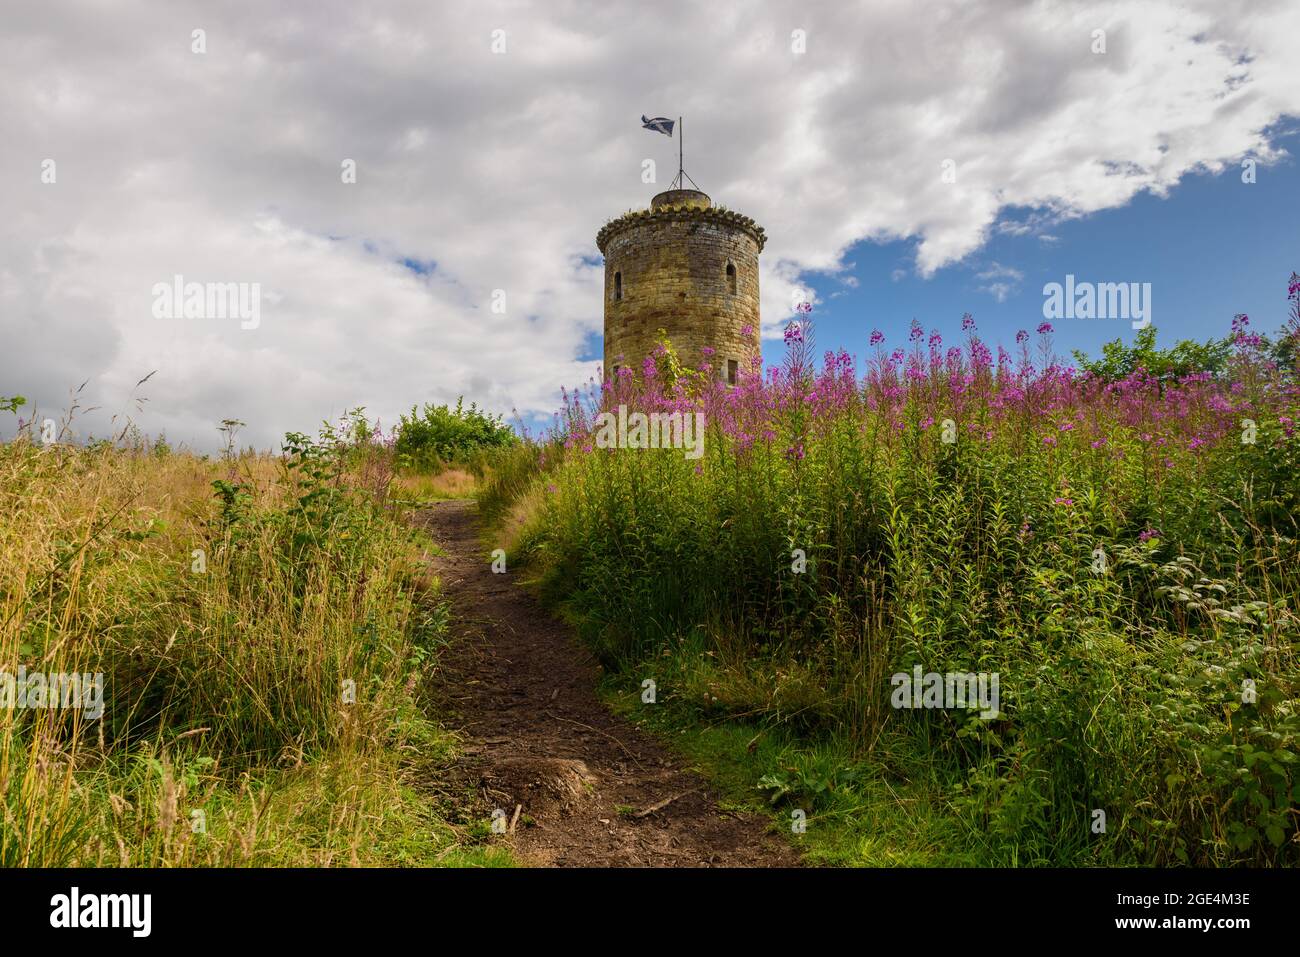 Knights Law Tower also known as Terregles Tower an old dovecote on The Pencuik House Estate in Midlothian, Scotland Stock Photo